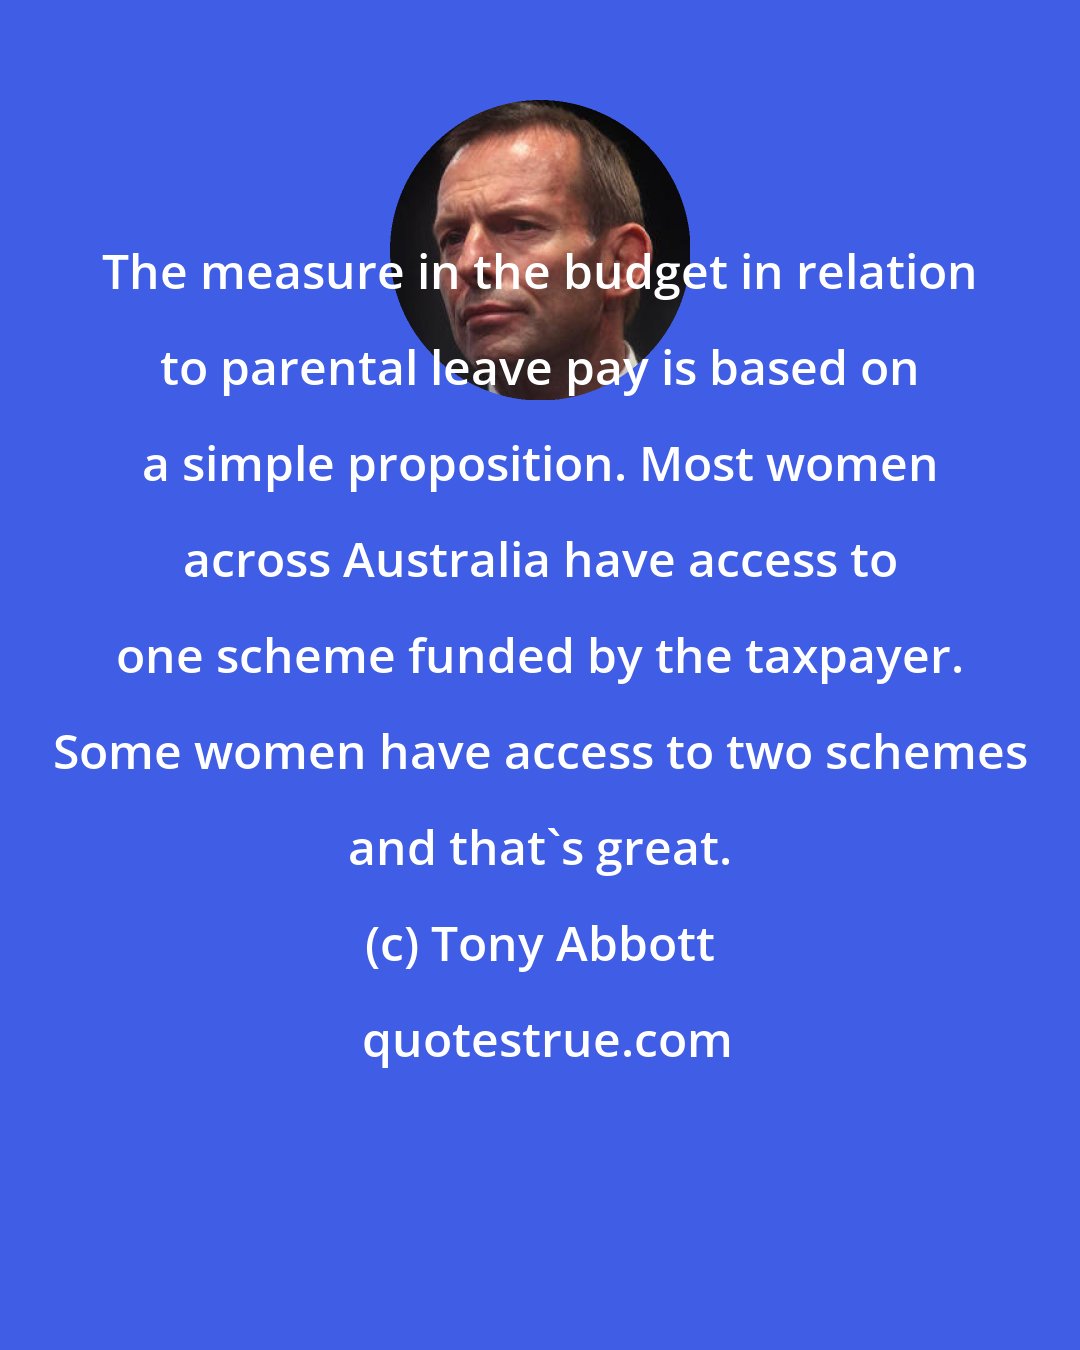 Tony Abbott: The measure in the budget in relation to parental leave pay is based on a simple proposition. Most women across Australia have access to one scheme funded by the taxpayer. Some women have access to two schemes and that's great.